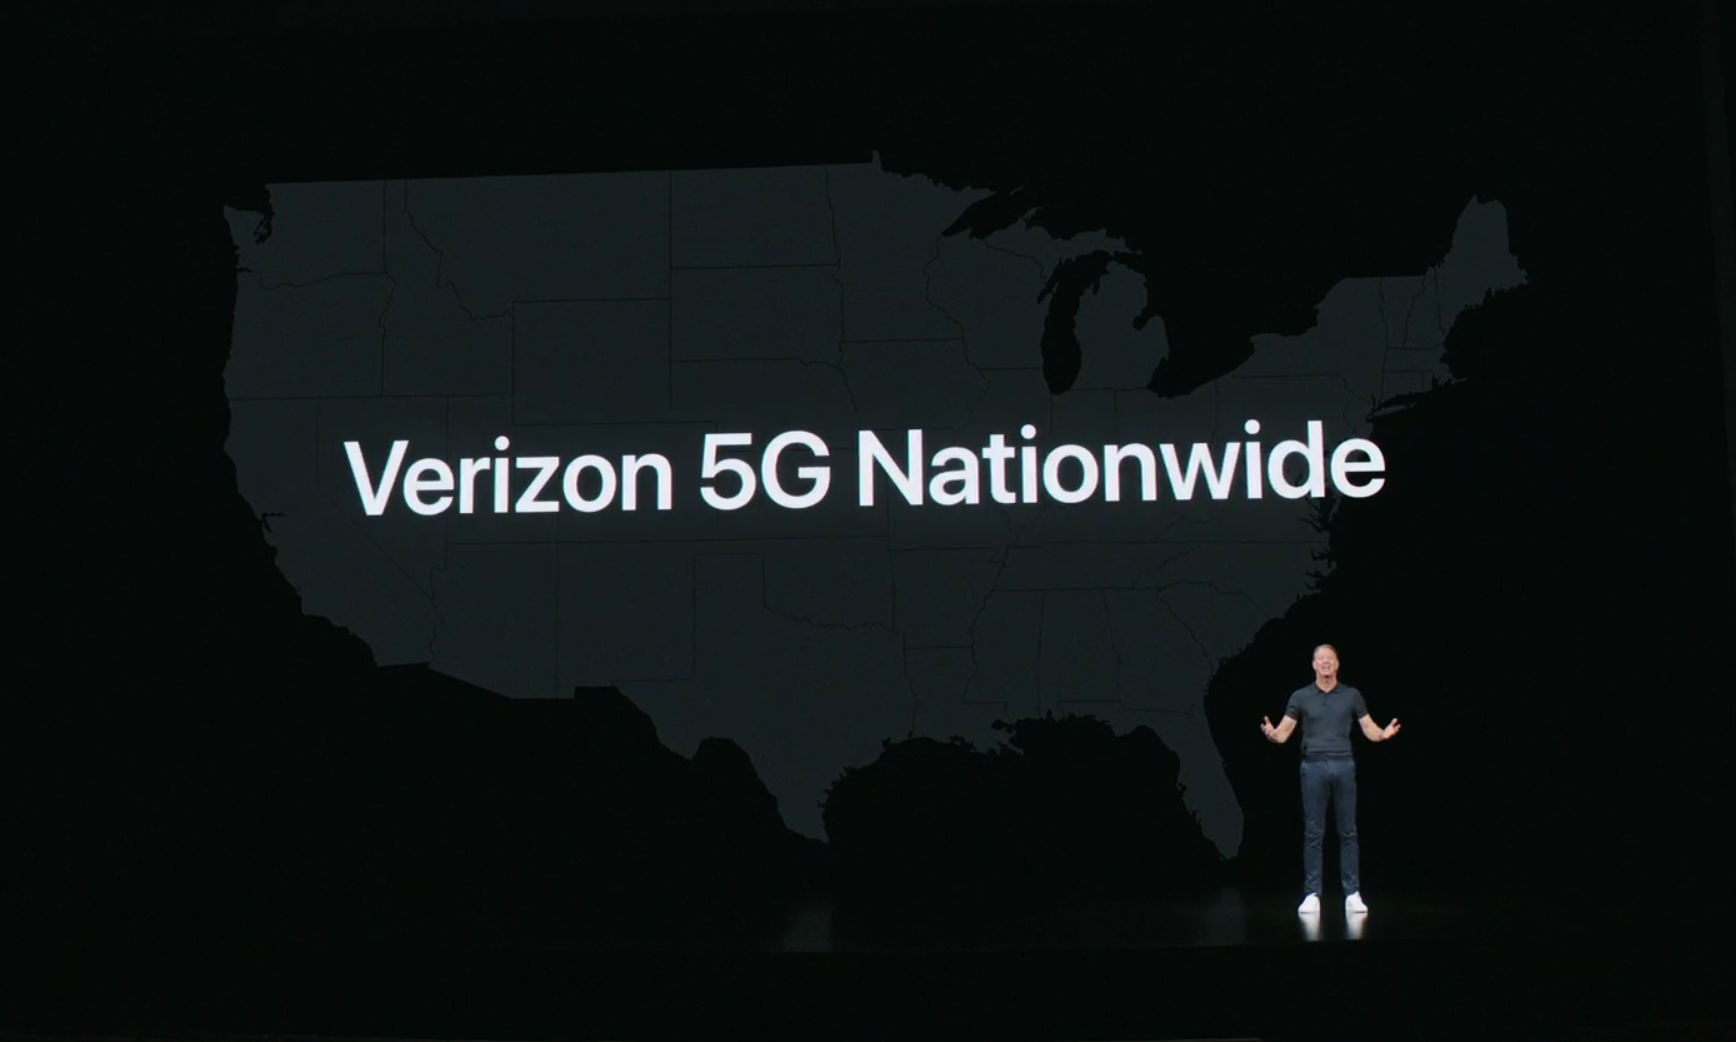 Verizon announced its new nationwide 5G network at the Apple iPhone 12 launch event - 5G on the iPhone 12: how the next-gen network will shape the mobile experience